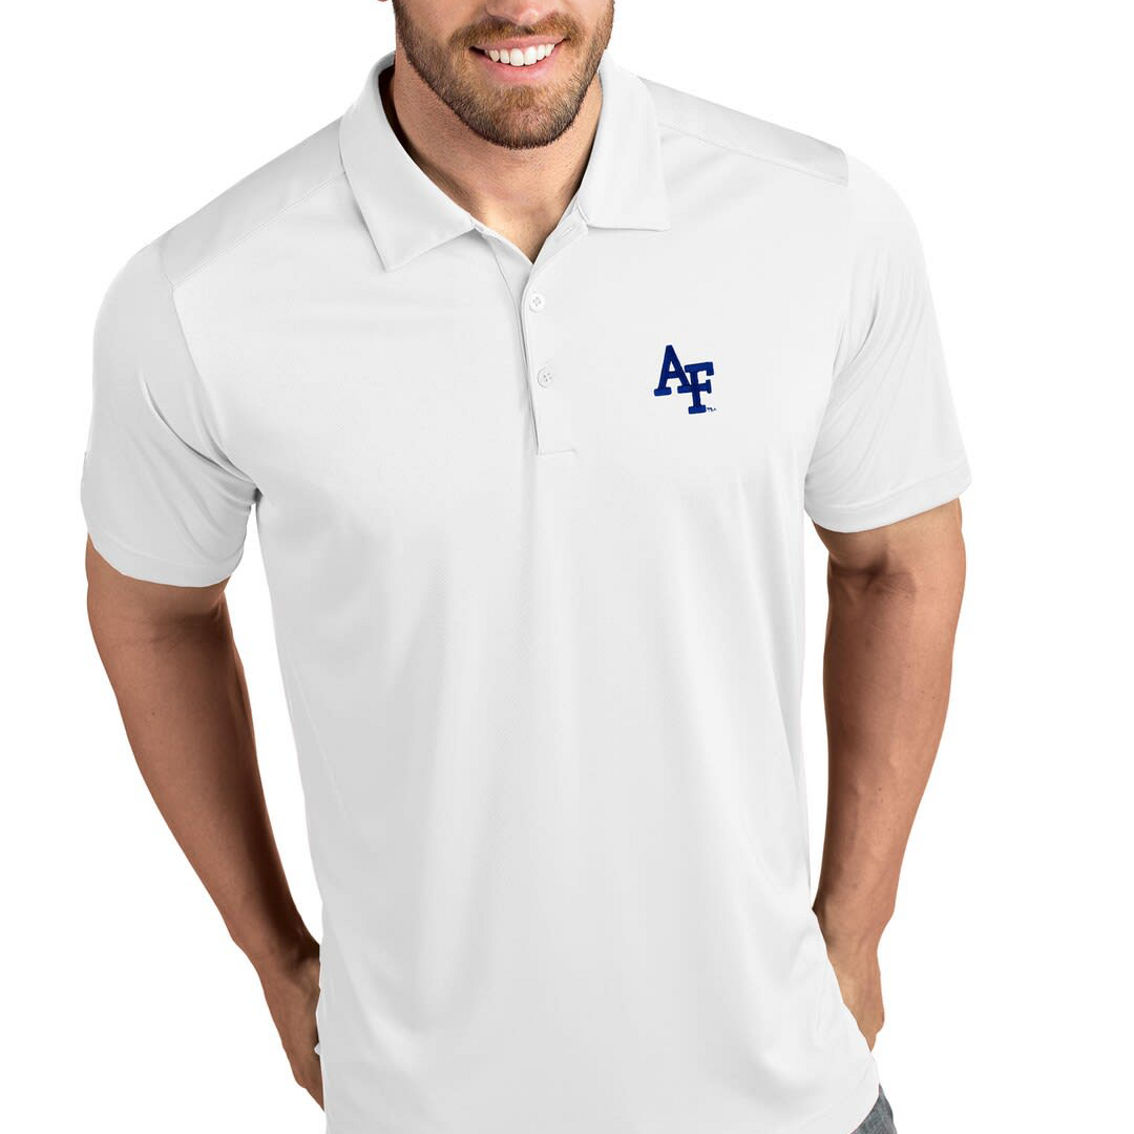 Antigua Air Force Falcons Tribute Polo - White - Image 2 of 2